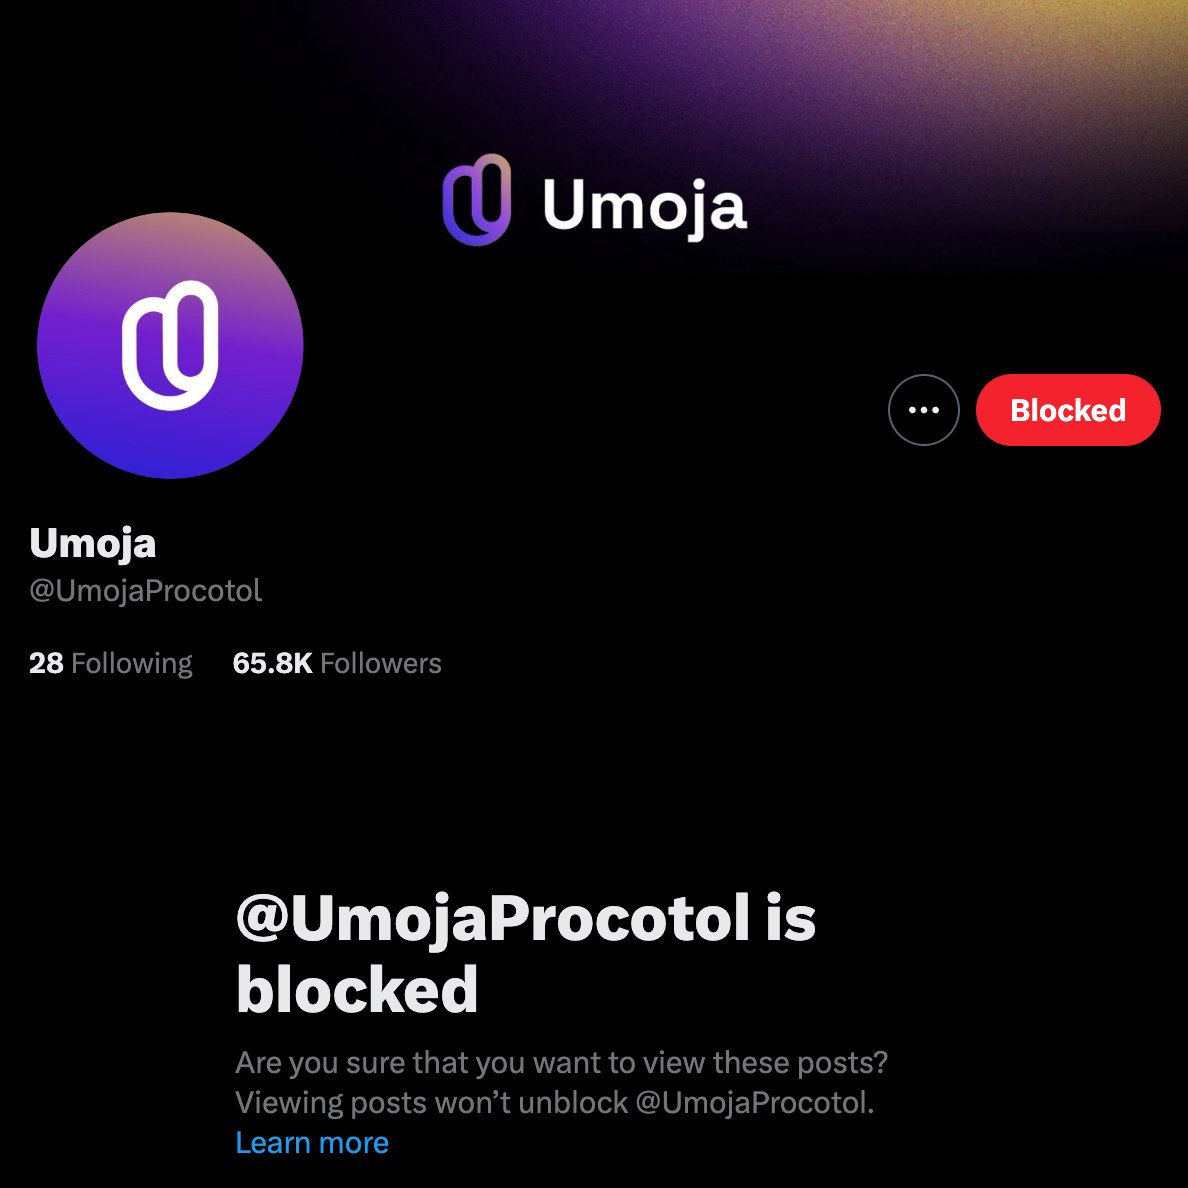 SCAM ALERT ❗️ SCAM ALERT ❗️SCAM ALERT

This account @UmojaProcotol has been impersonating us and posting scams under our own tweets.

It will tell you go on a website that looks exactly like ours. 

DO. NOT. CLICK. ANYTHING. ON. THIS. WEBSITE. 

Please REPORT and BLOCK this